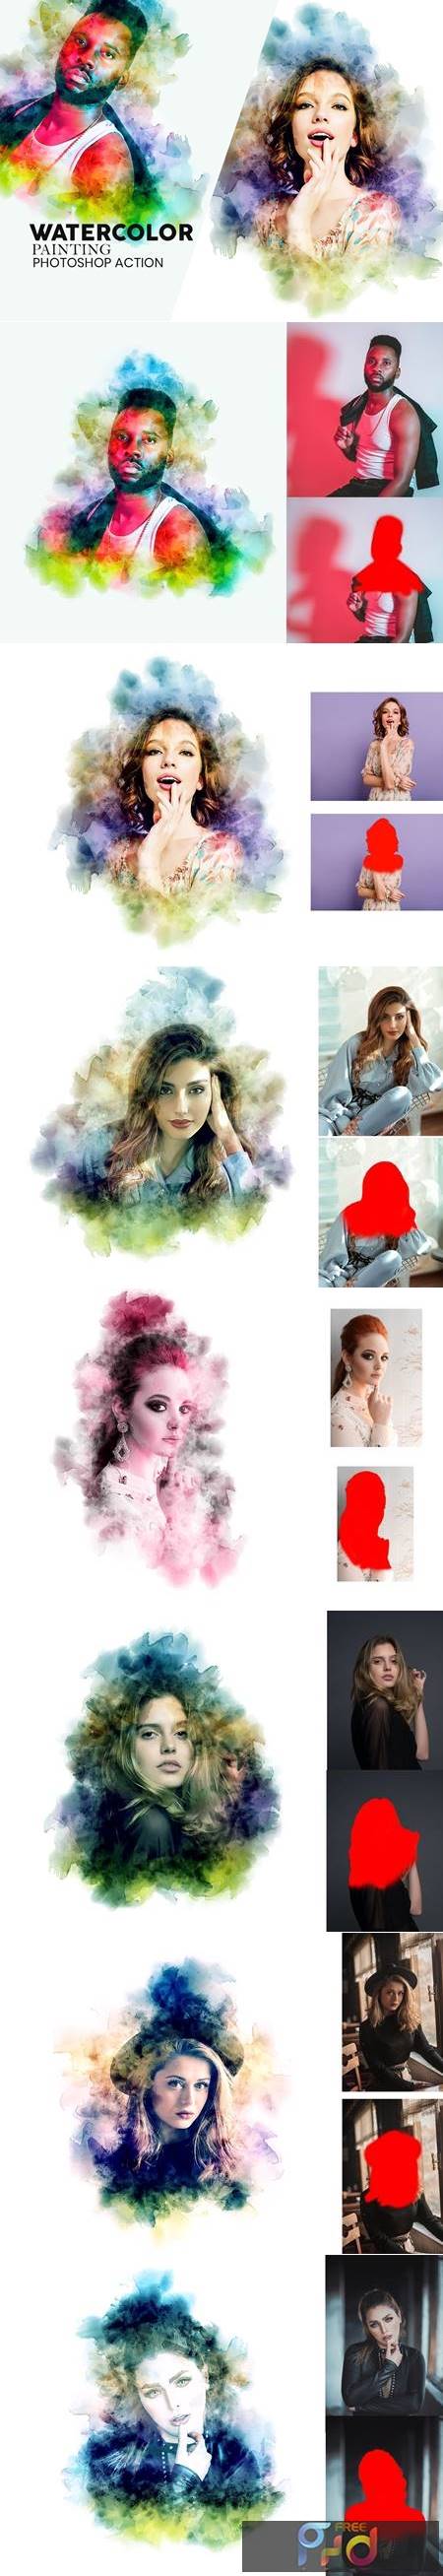 Watercolor Painting Photoshop Action 5836681 1